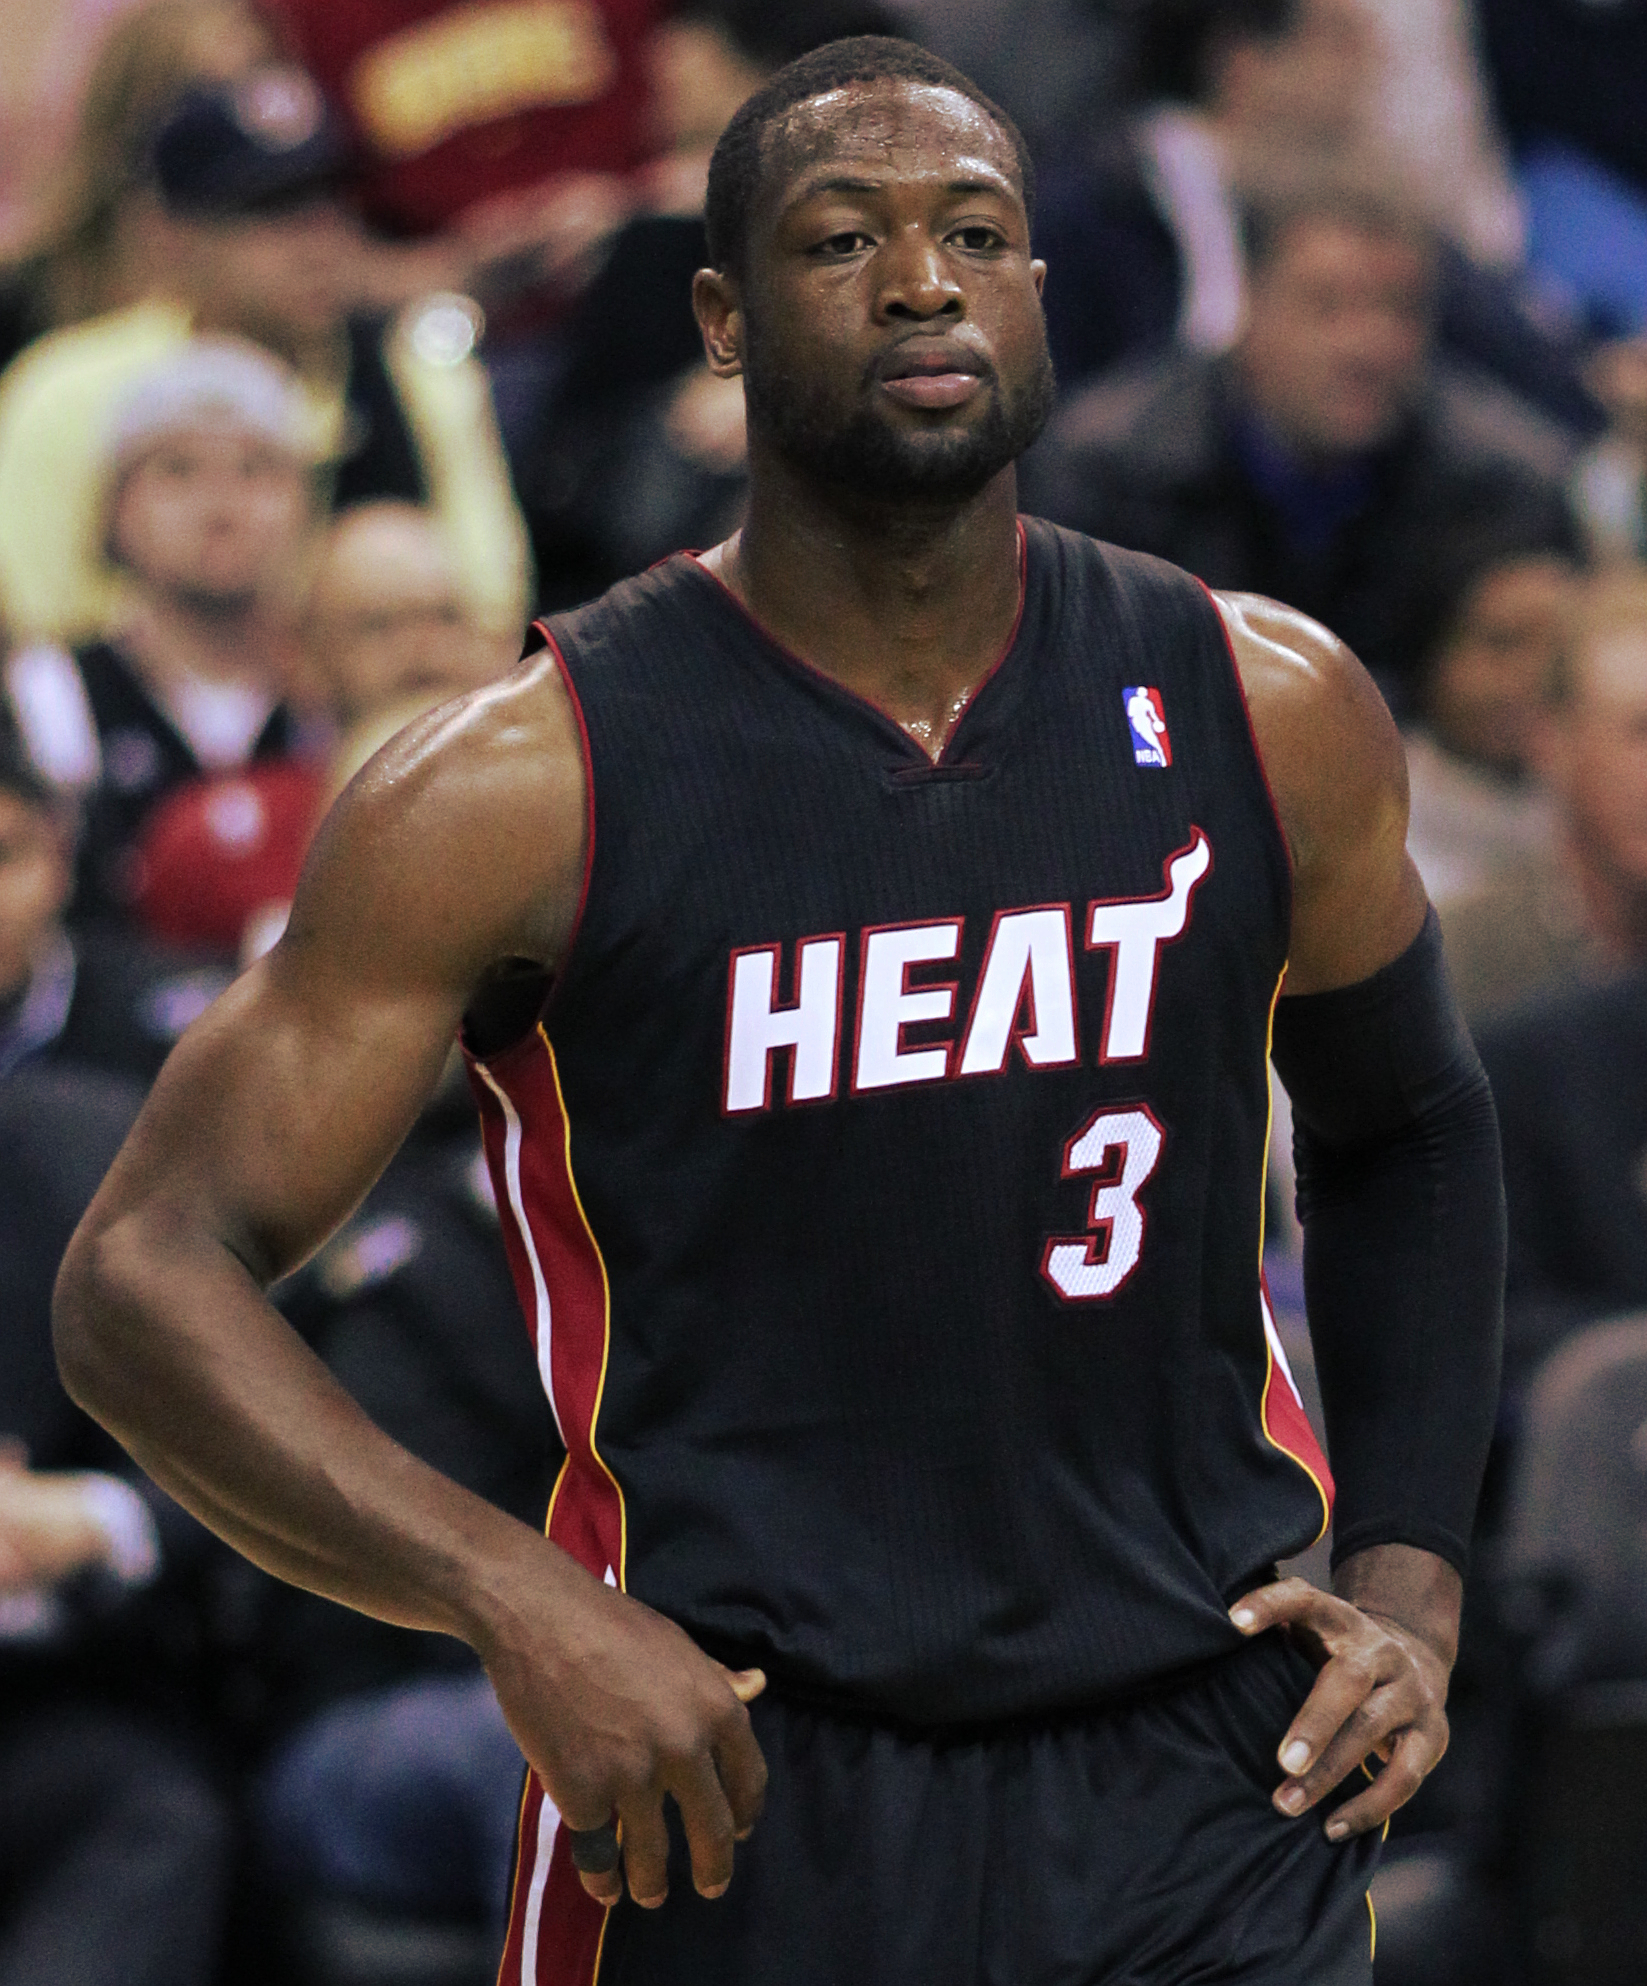 How the relationship between Dwyane Wade and the Miami Heat fell apart 